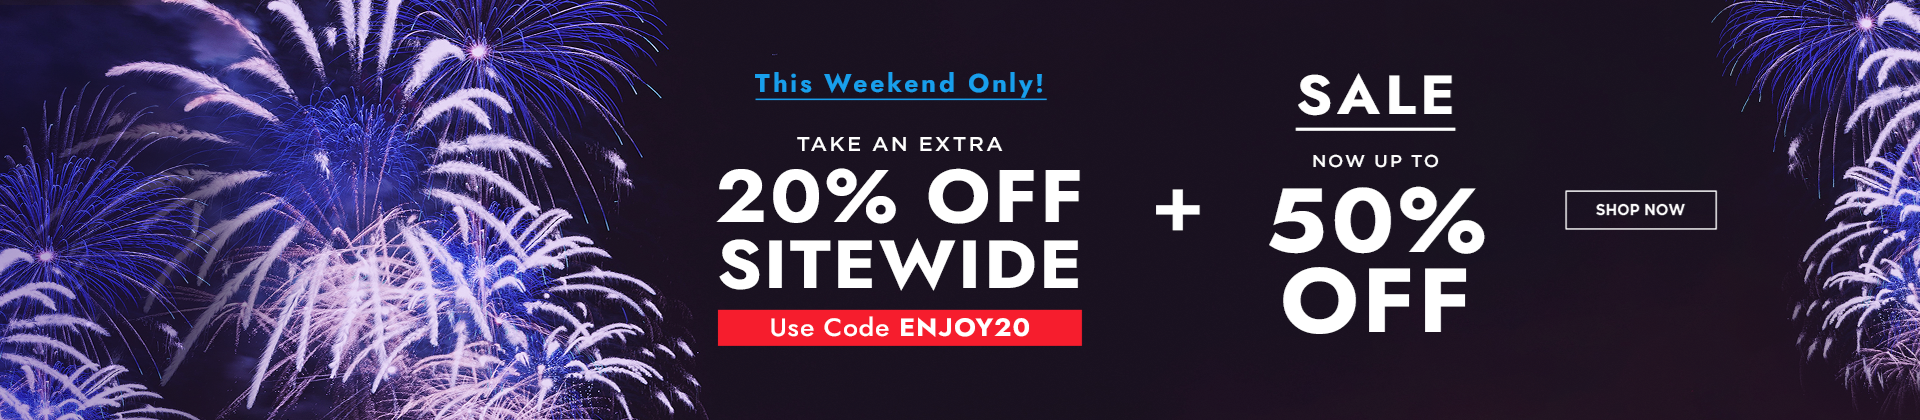 H1: EXTRA 20% + UP TO 50% SALE